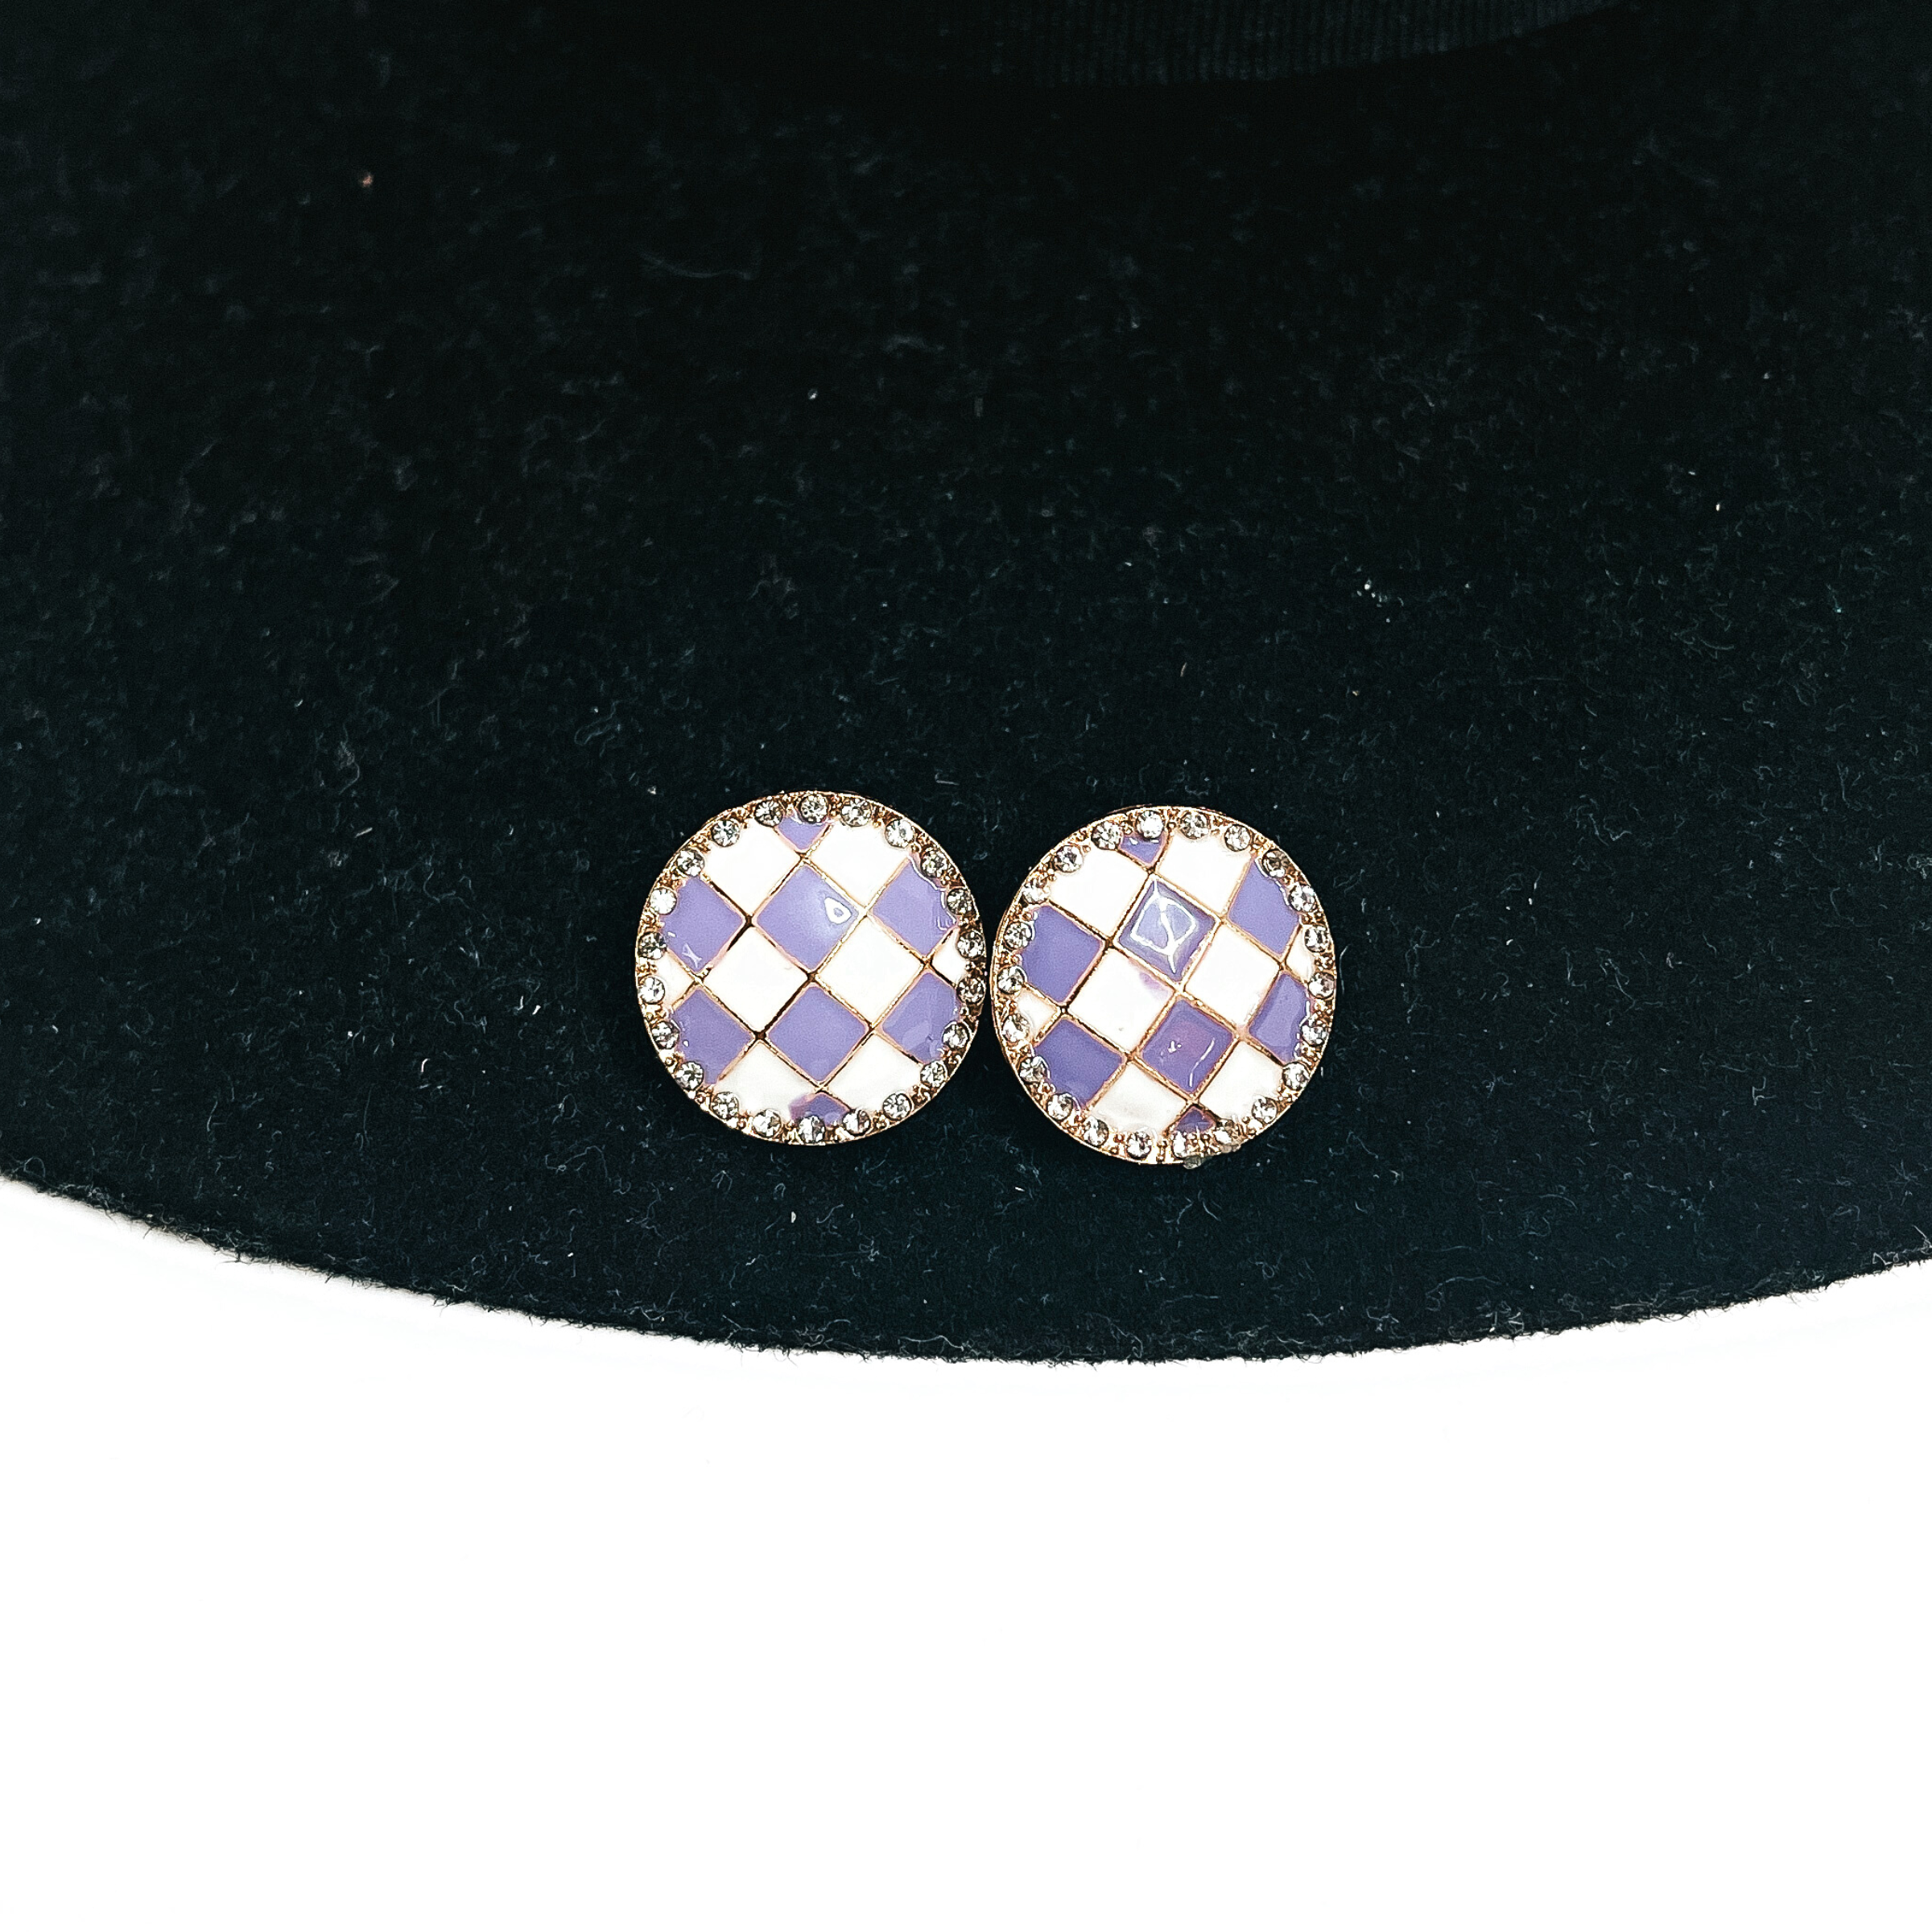 This is a pair of checkered patterned stud earrings in white/light purple in a gold  setting with clear crystals all around. This pair of earrings is laying on a  black felt hat brim and on a white background.